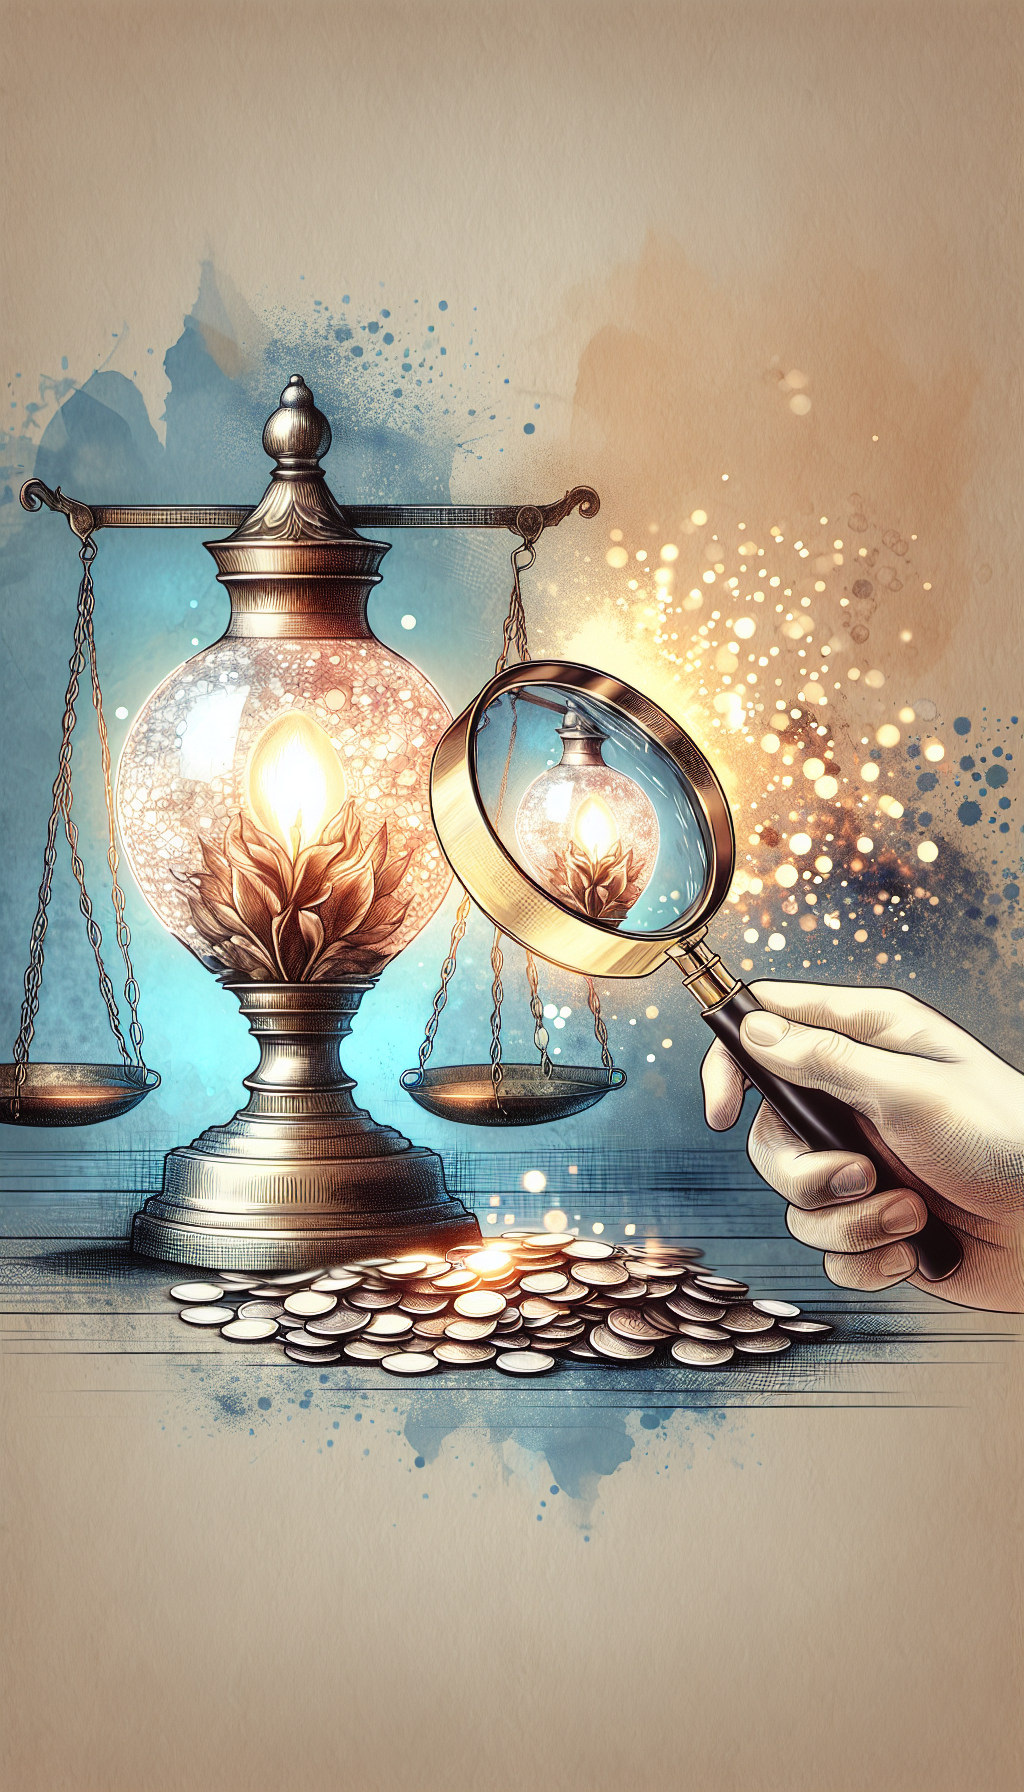 An illustrated tableau depicts a magnifying glass revealing the intricate details of a luminescent antique lamp, with visible brushstrokes of a painterly style contrasting with the photo-realistic rendering of the lamp. Golden light spills onto a scale balancing the lamp's artistic beauty against shimmering coins, symbolizing its value, with the backdrop subtly transitioning from a detailed etching to a soft watercolor wash.